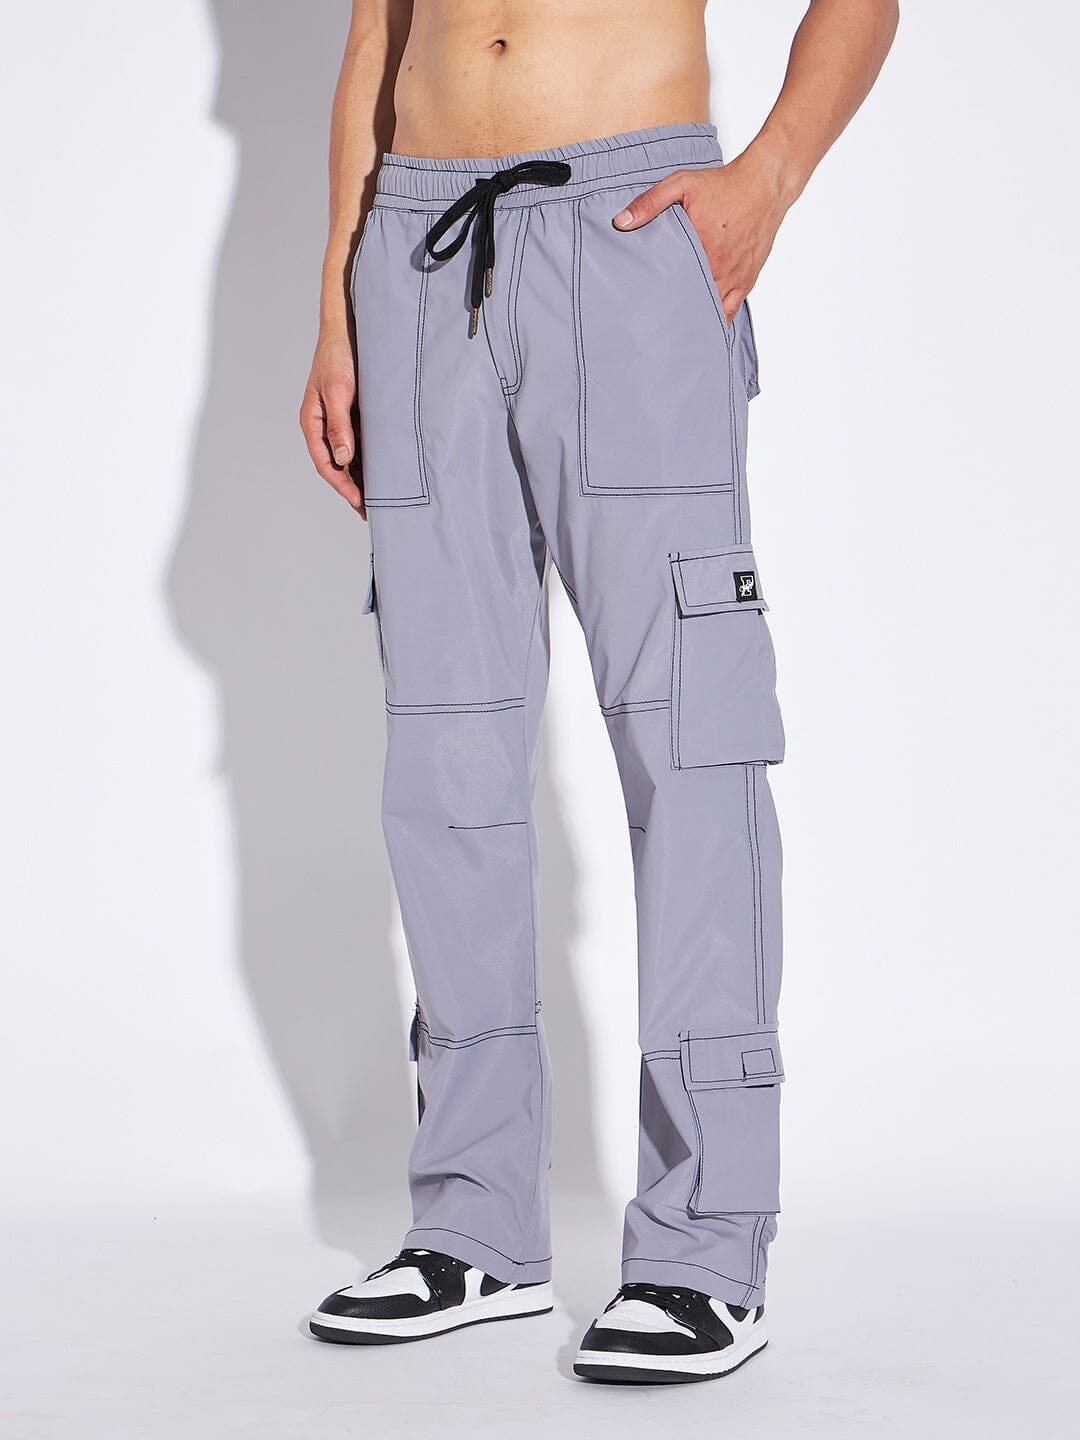 FUGAZEE Men's Polyester Grey Nylon Tactical Cargo Trackpants : Amazon.in:  Clothing & Accessories